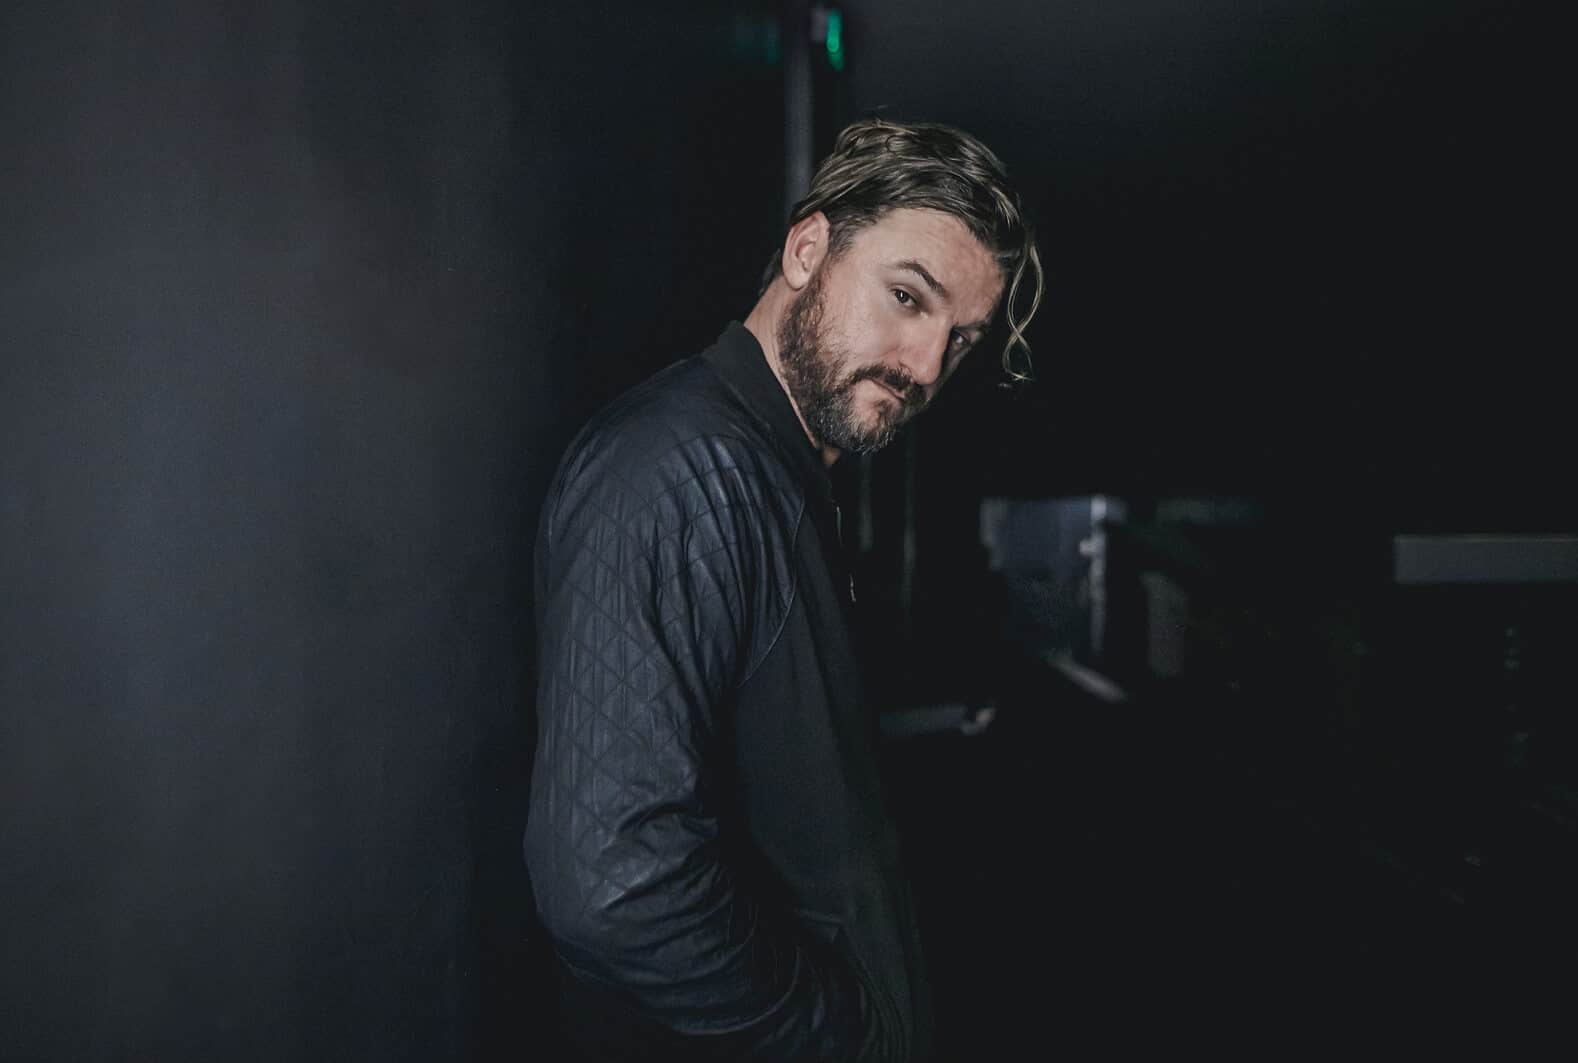 Solomun makes statement explaining absence at this year’s edition of Tomorrowland ahead of scheduled set